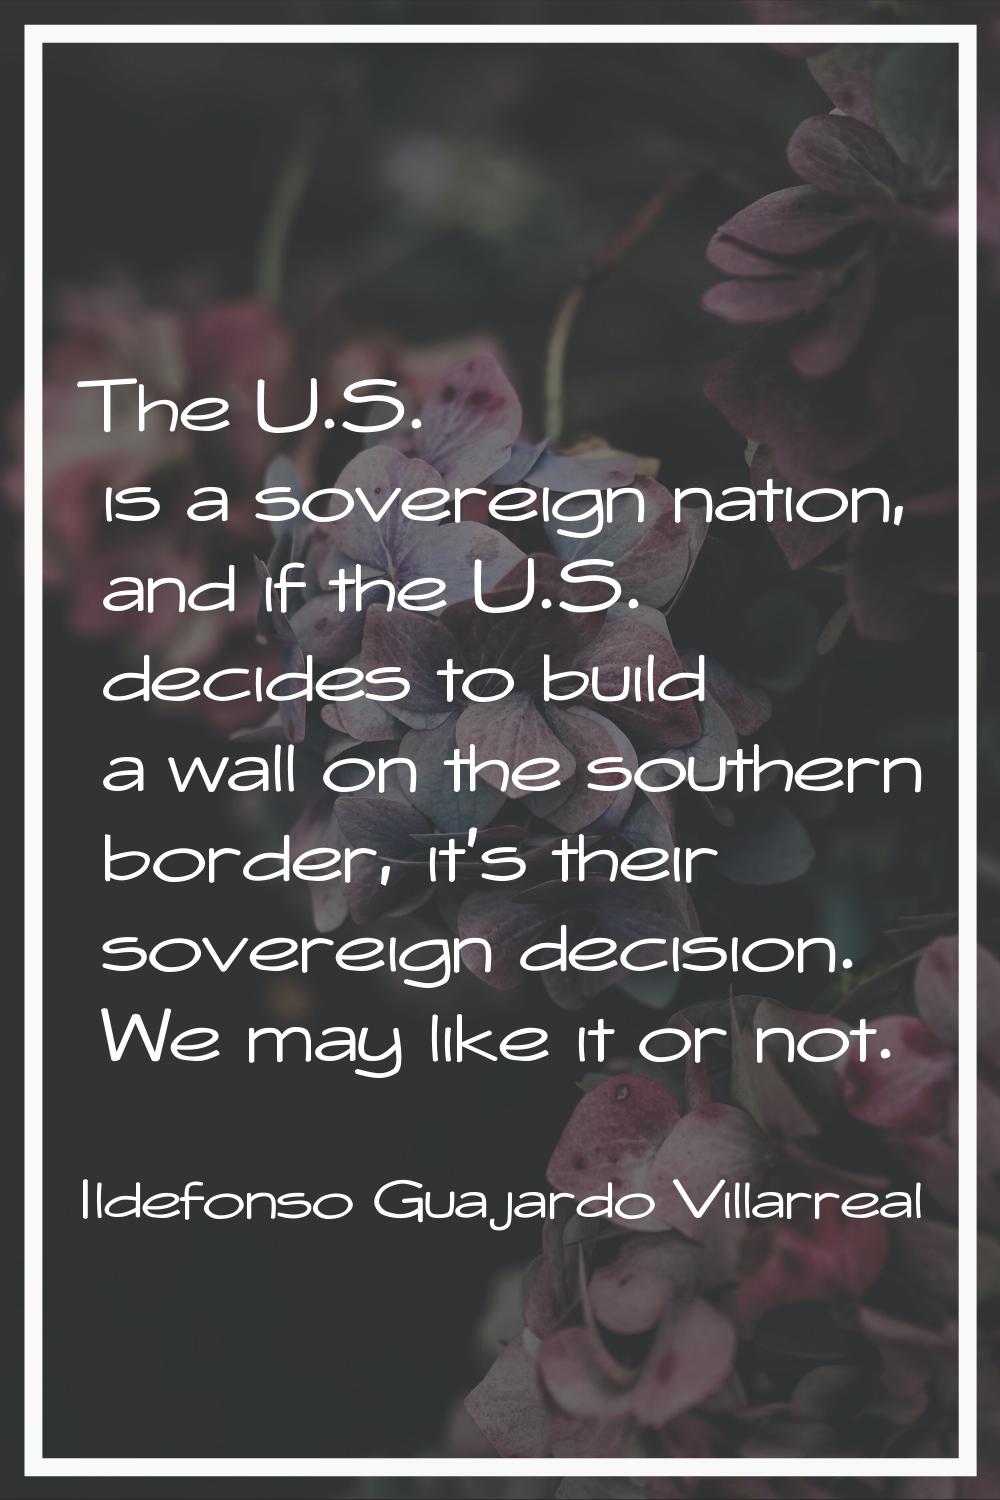 The U.S. is a sovereign nation, and if the U.S. decides to build a wall on the southern border, it'